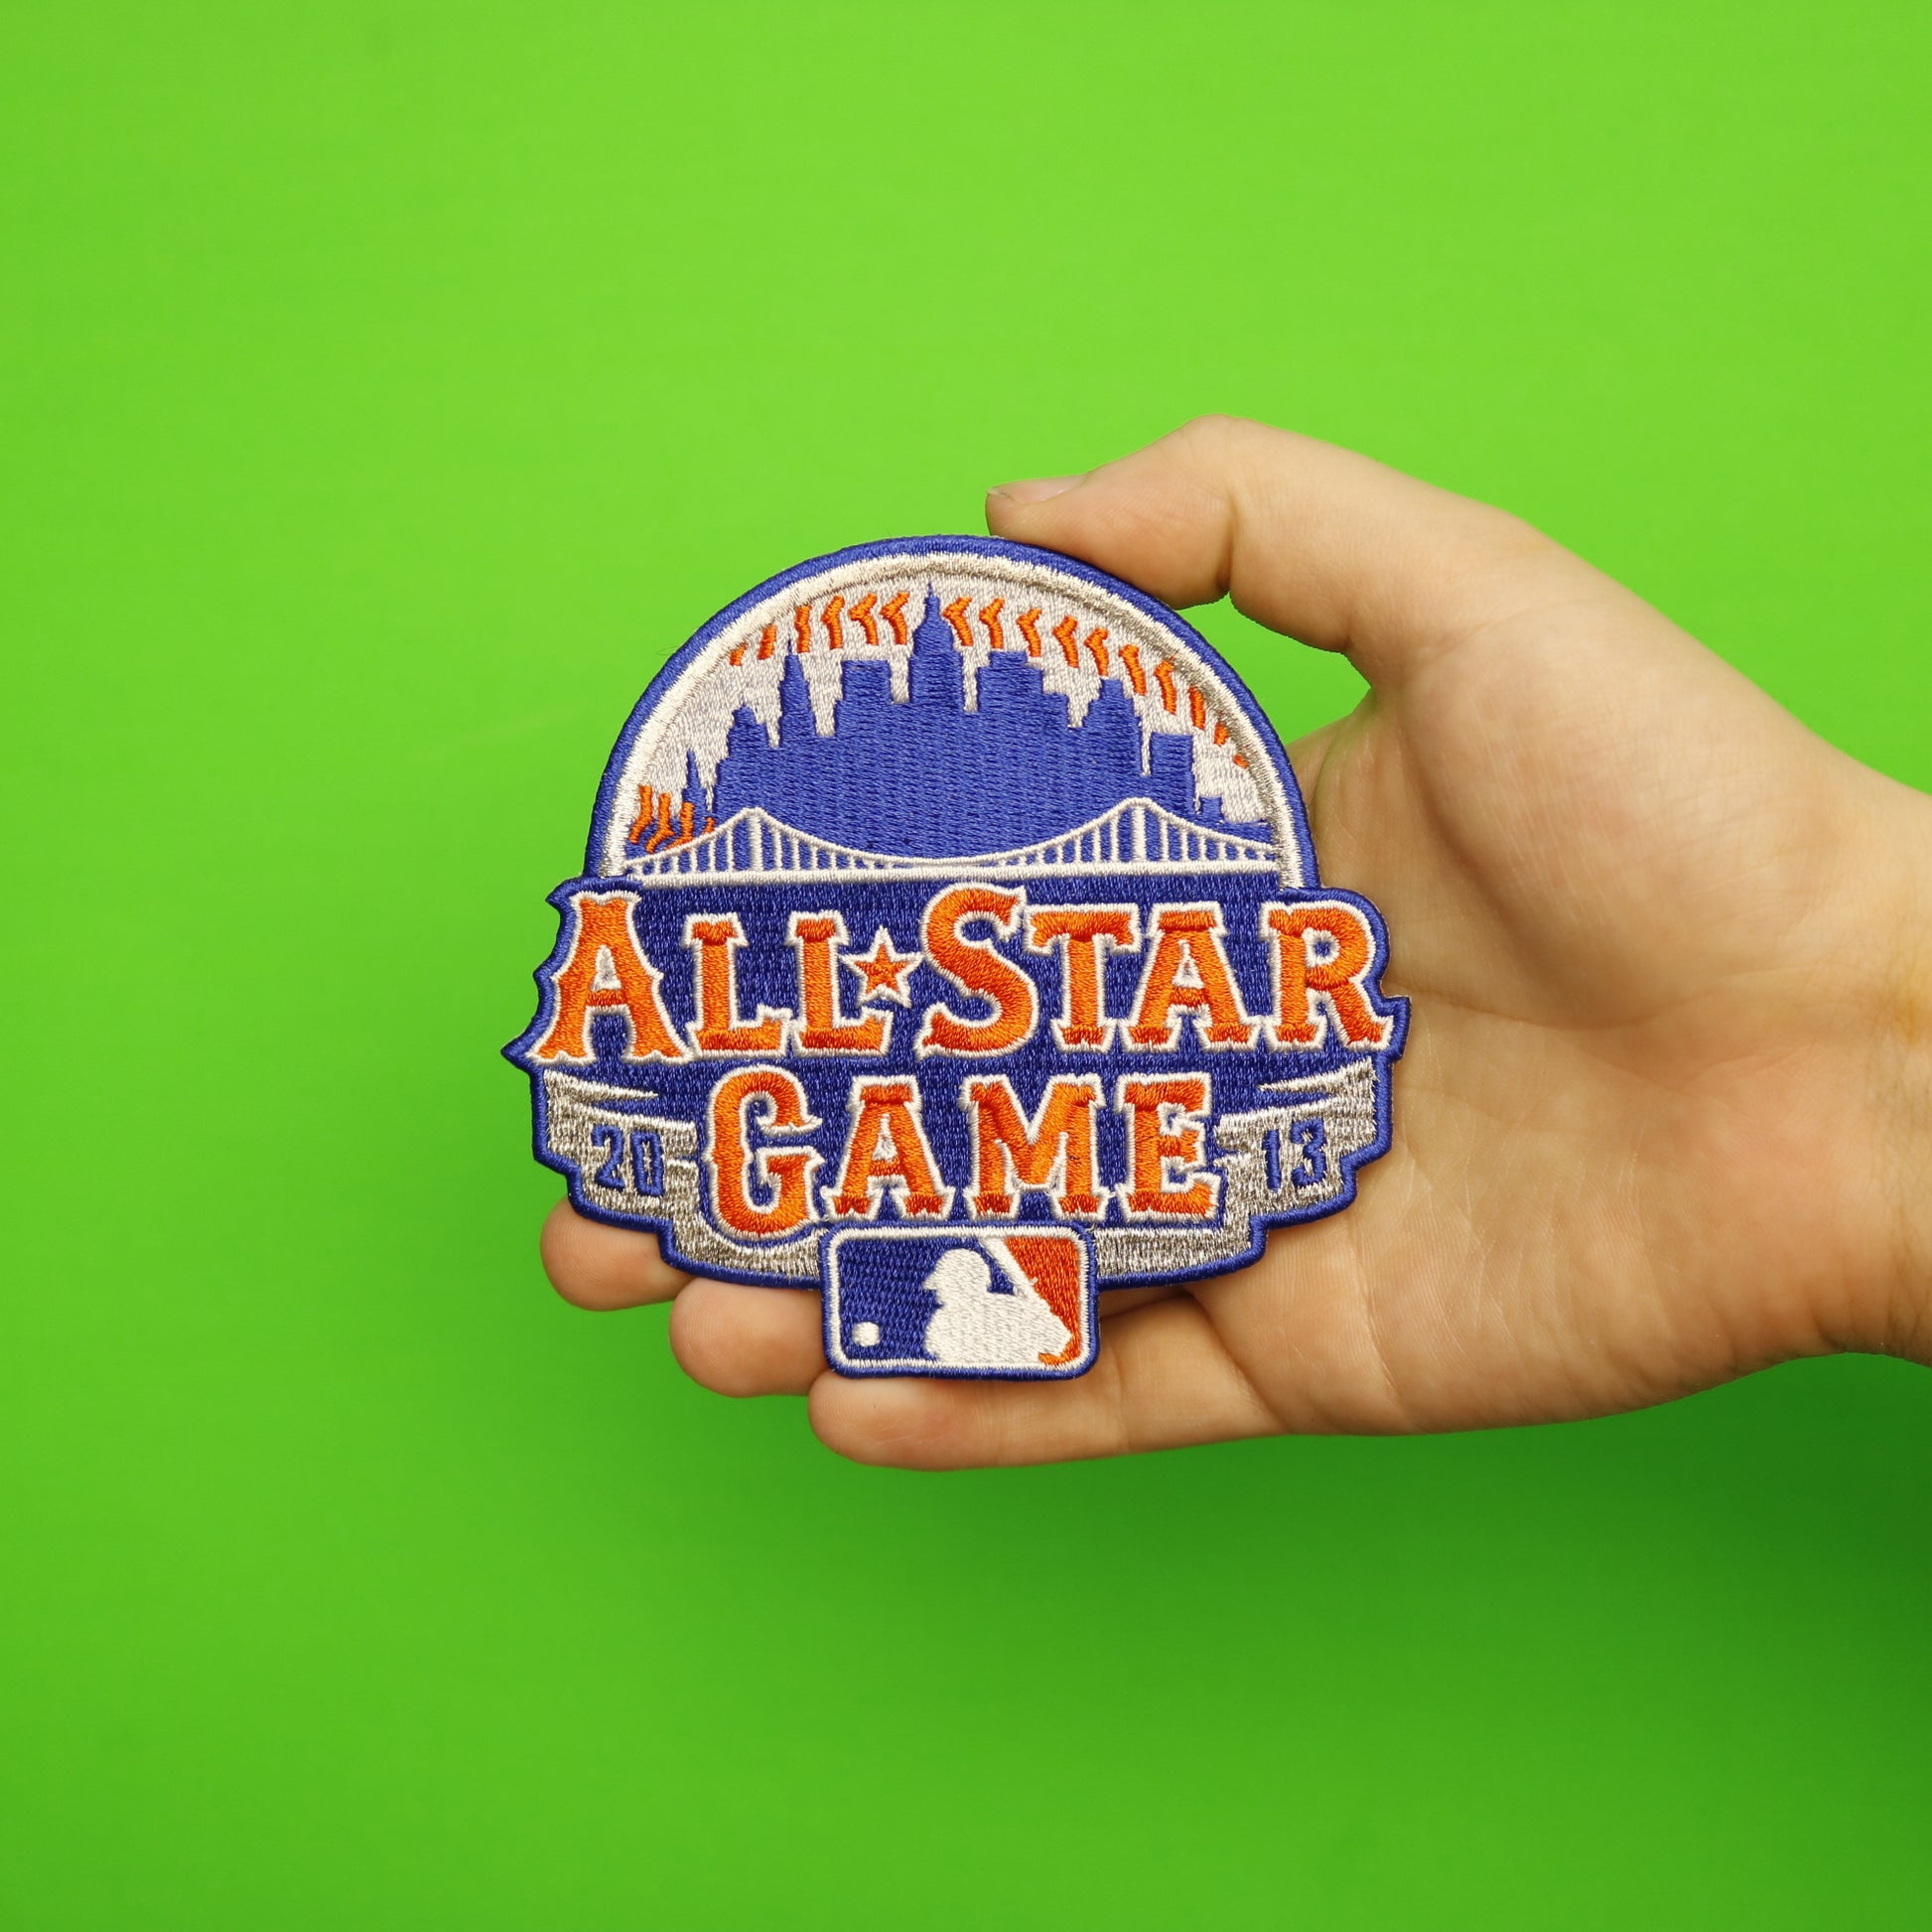 2013 MLB All-Star Game in photos